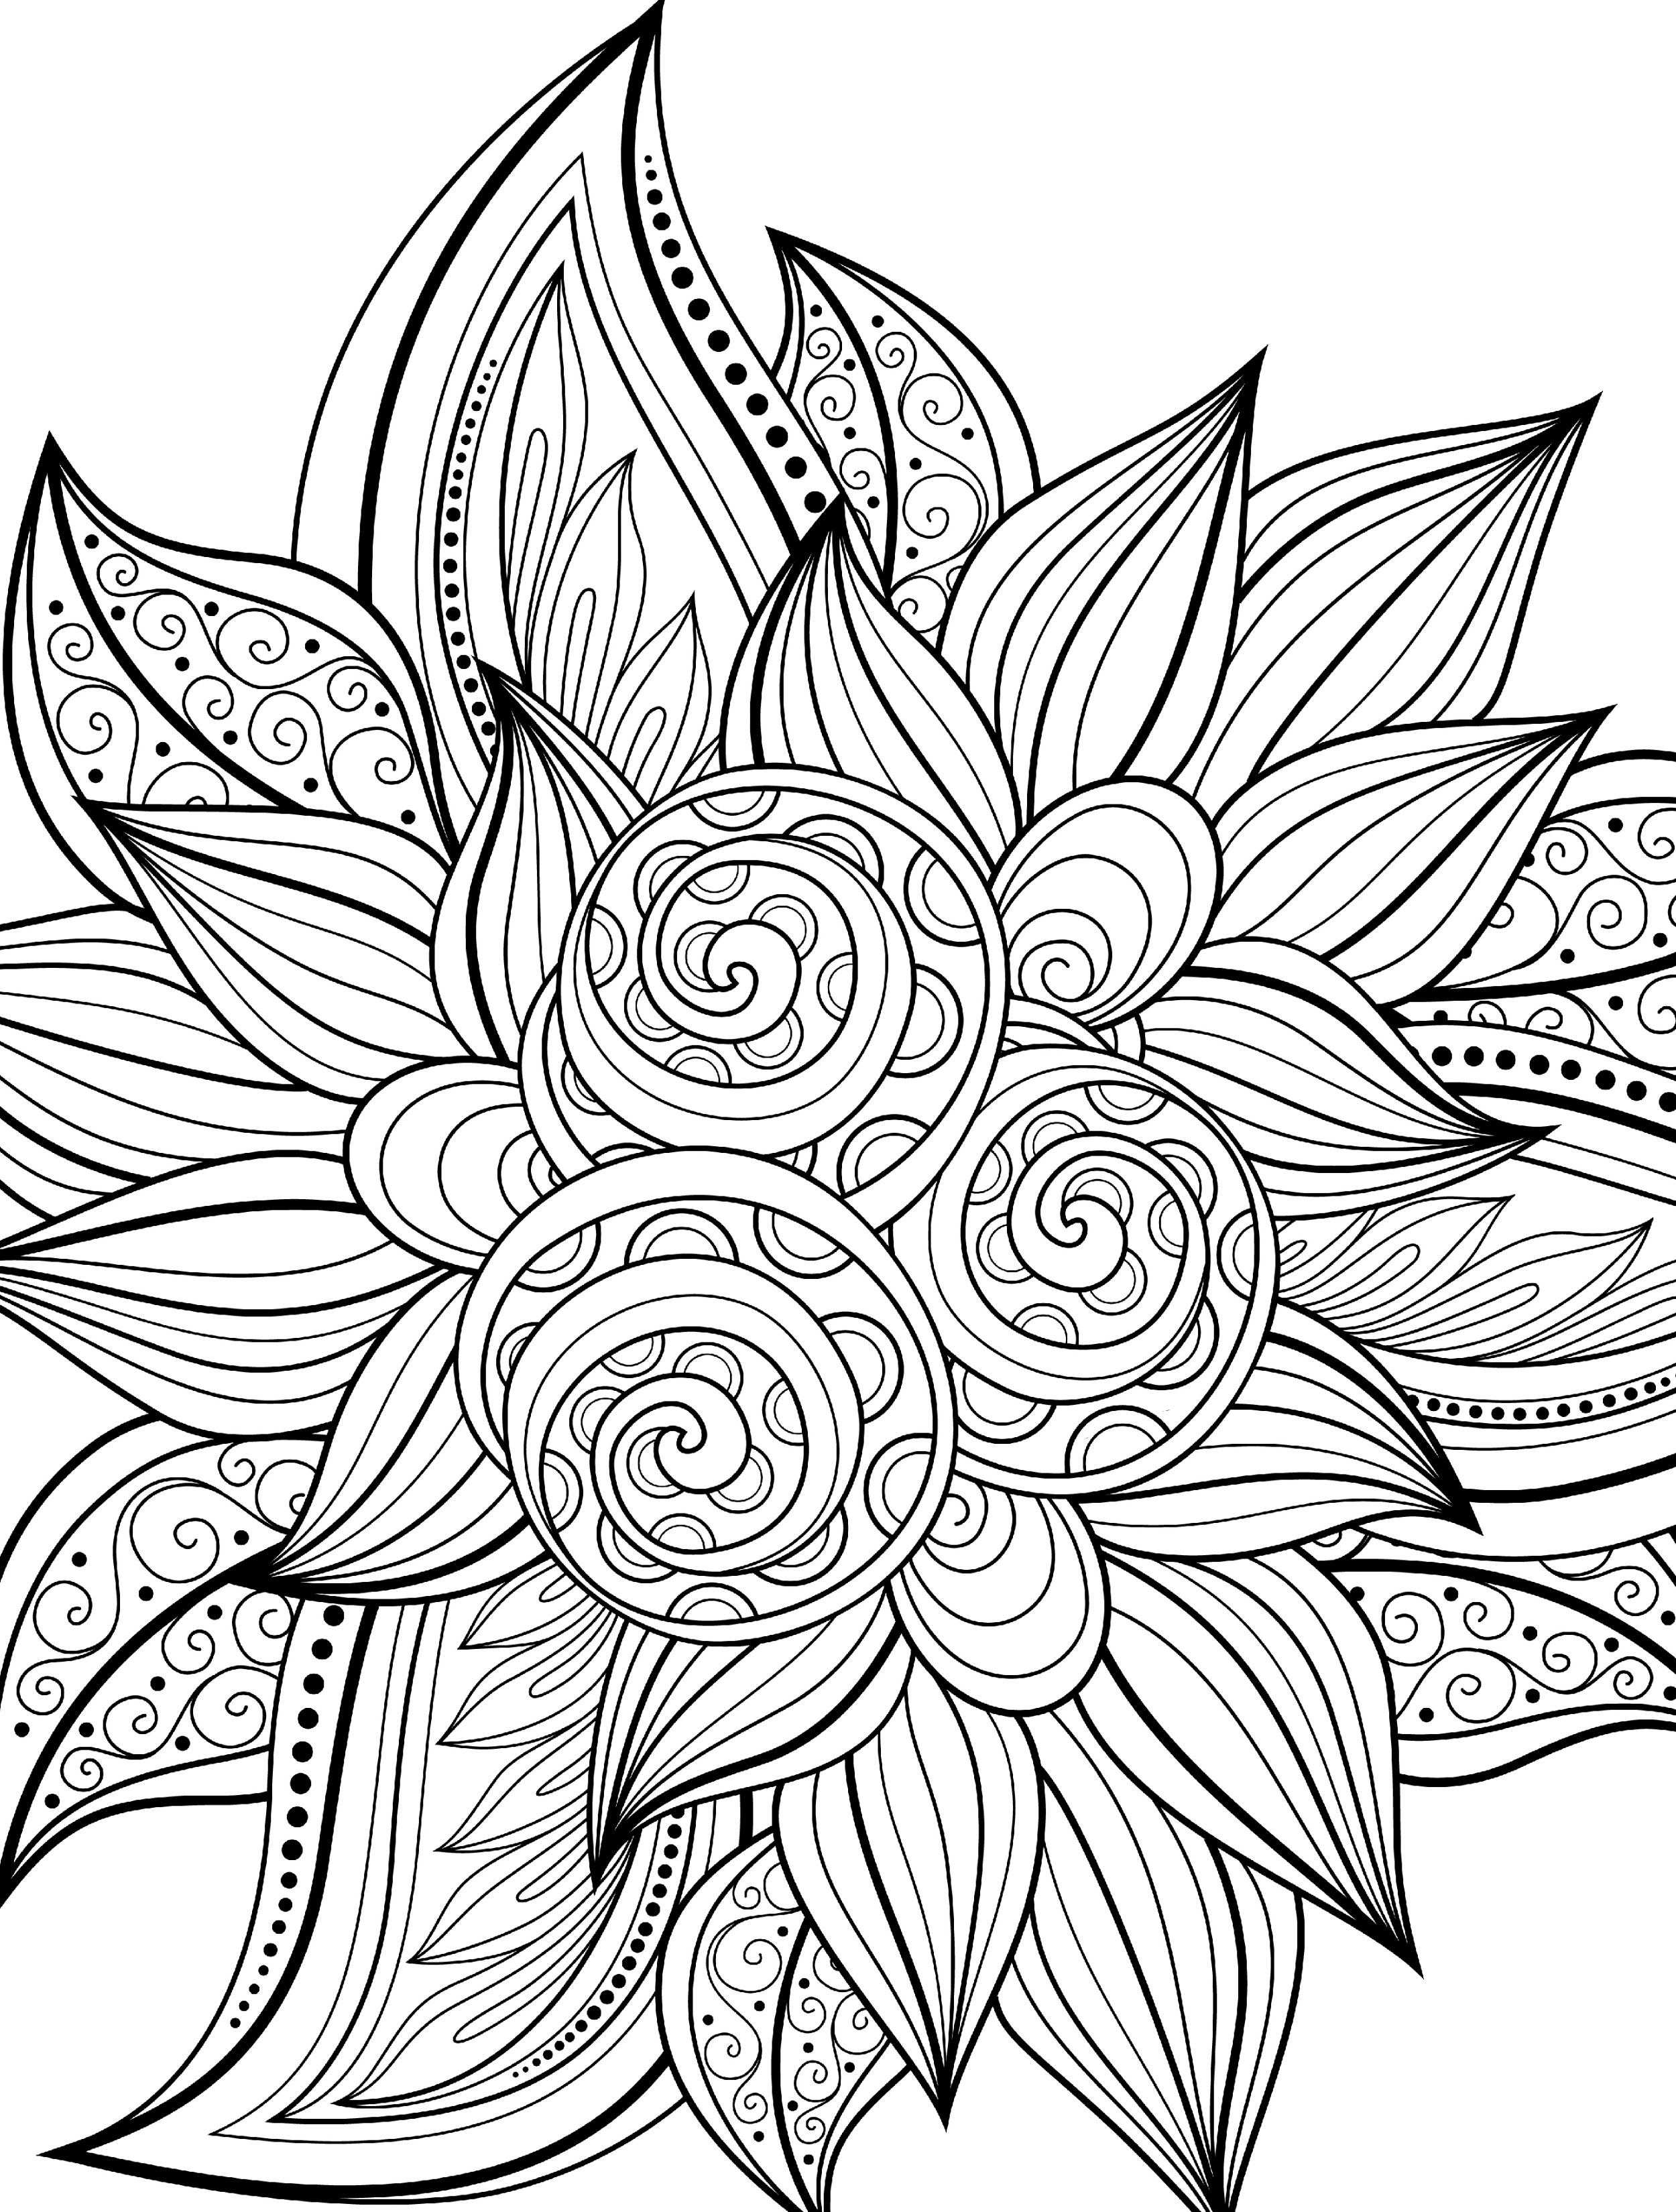 Cool Printable Coloring Pages For Adults
 10 Free Printable Holiday Adult Coloring Pages